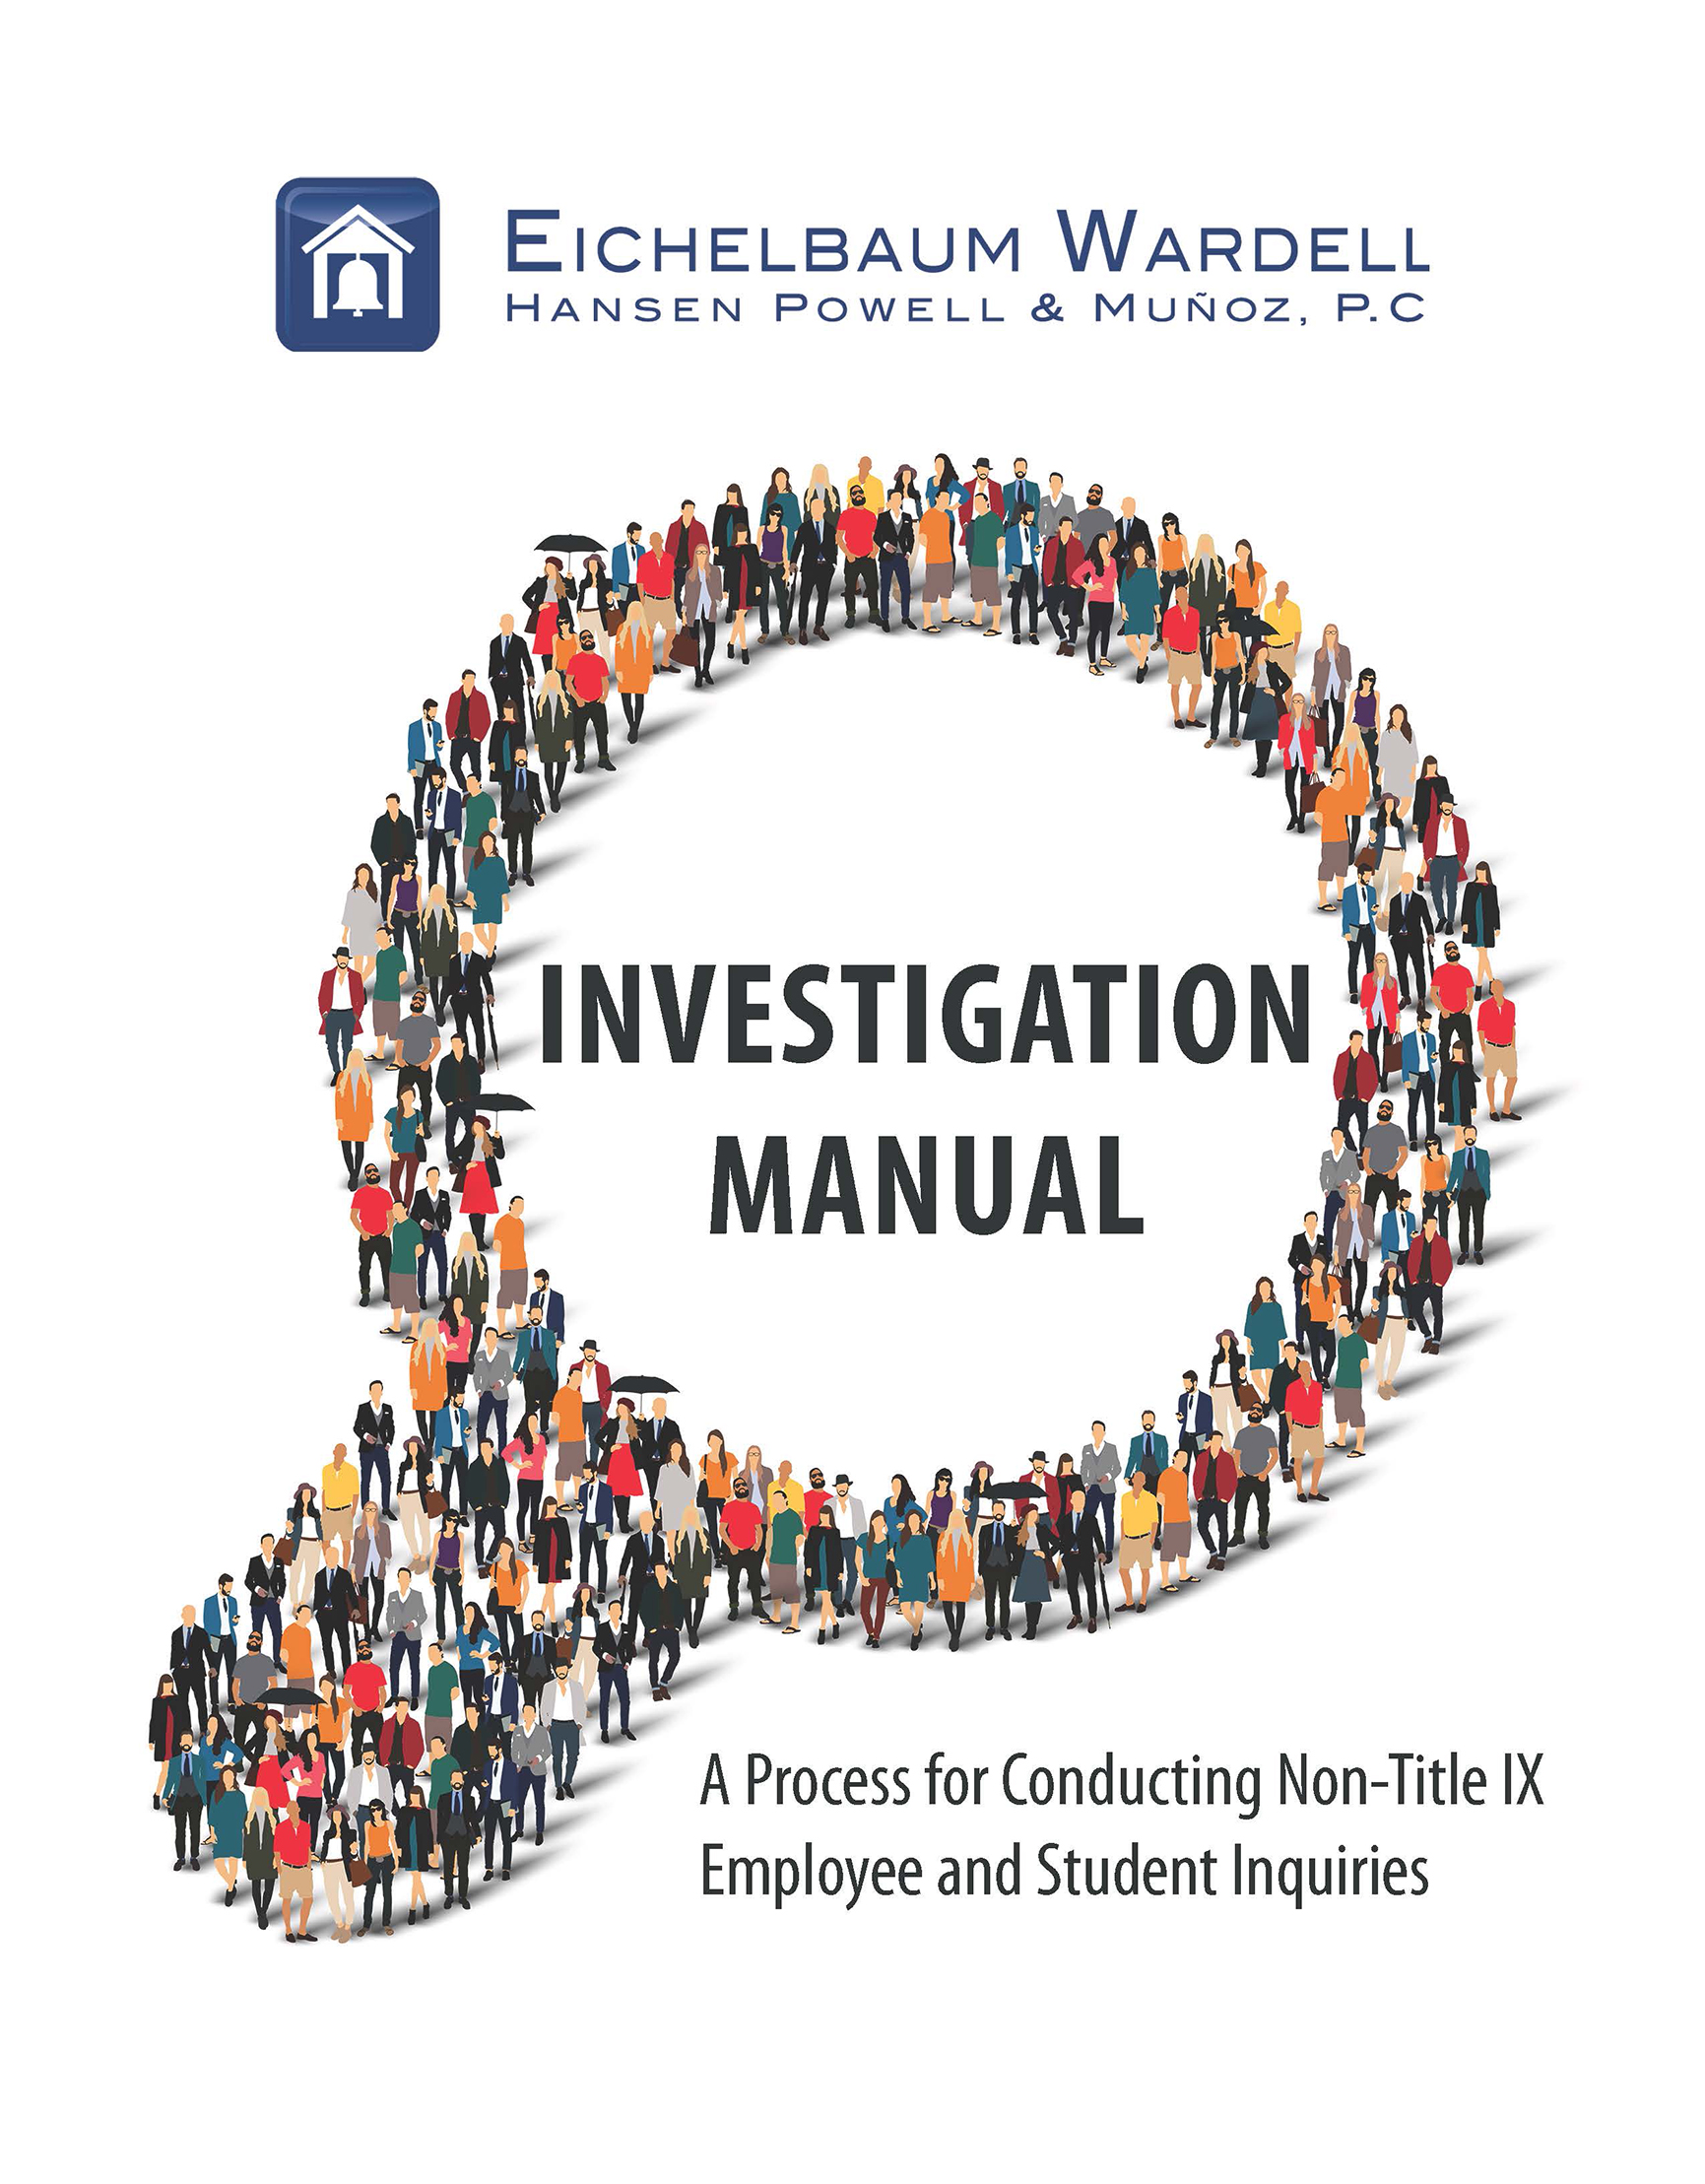 Investigation Manual: A Process for Conducting Non-Title IX Employee and Student Inquiries